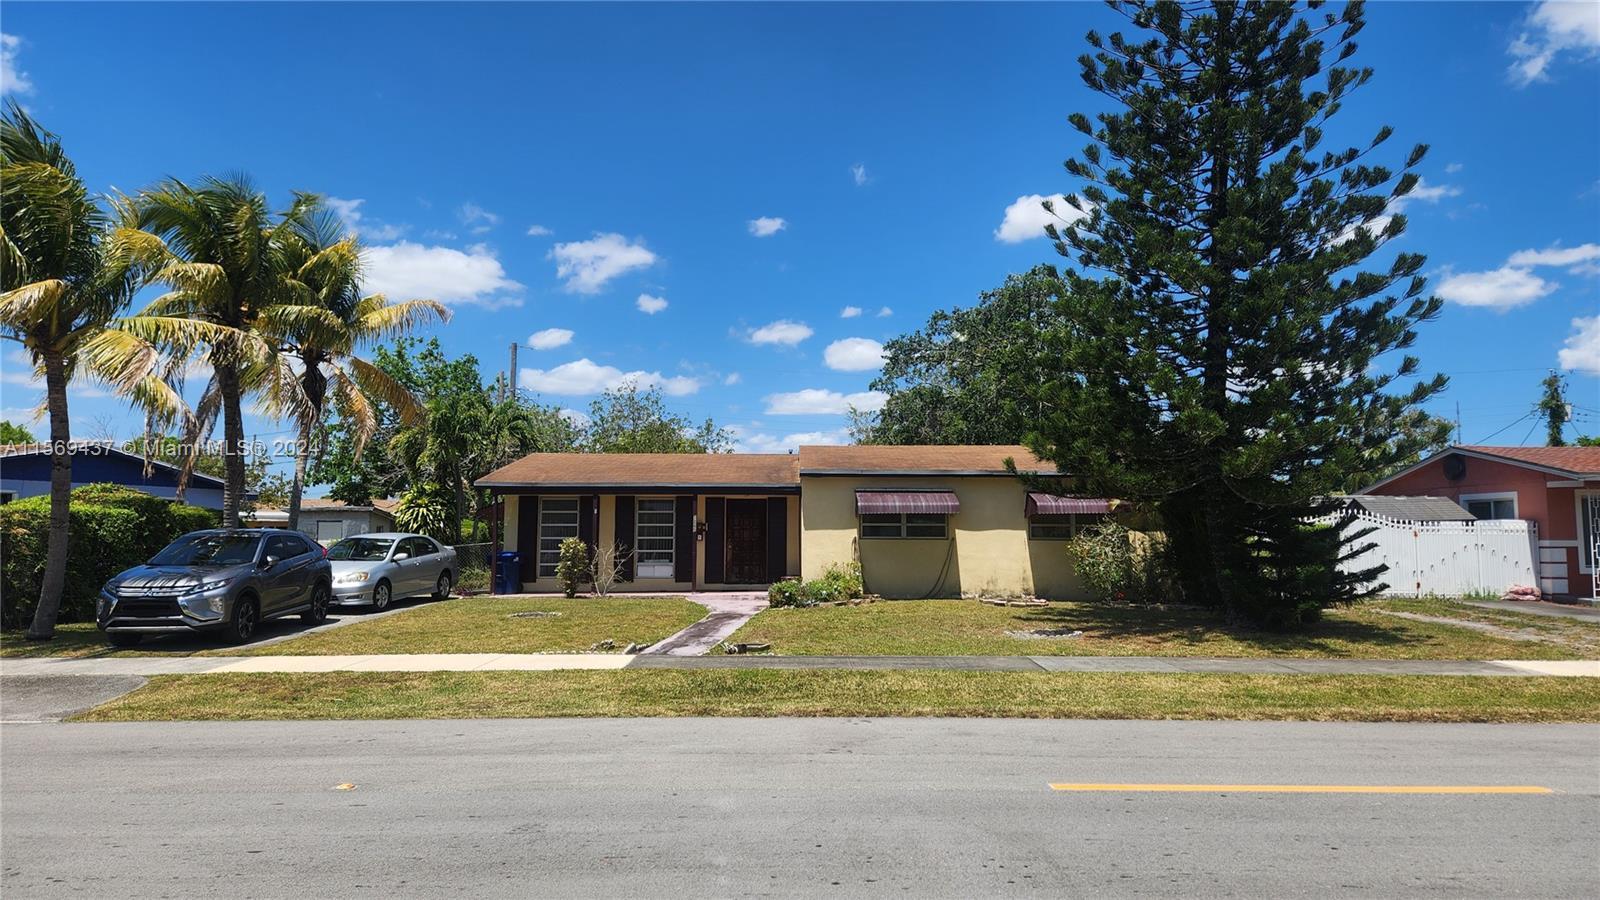 Photo of 1265 NW 187th St in Miami Gardens, FL